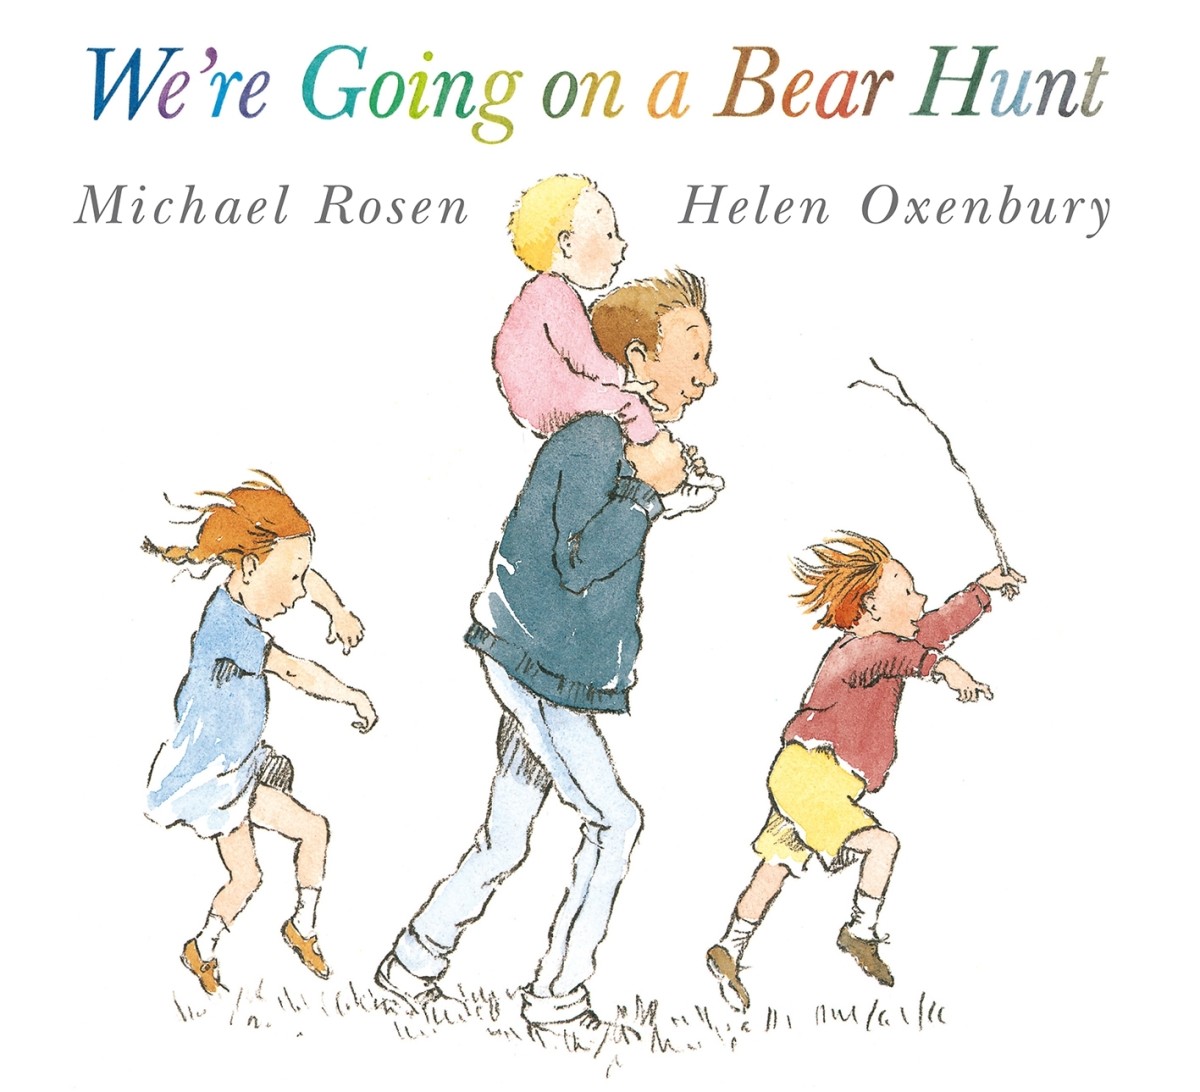 Going on a Bear Hunt by Helen Oxenbury